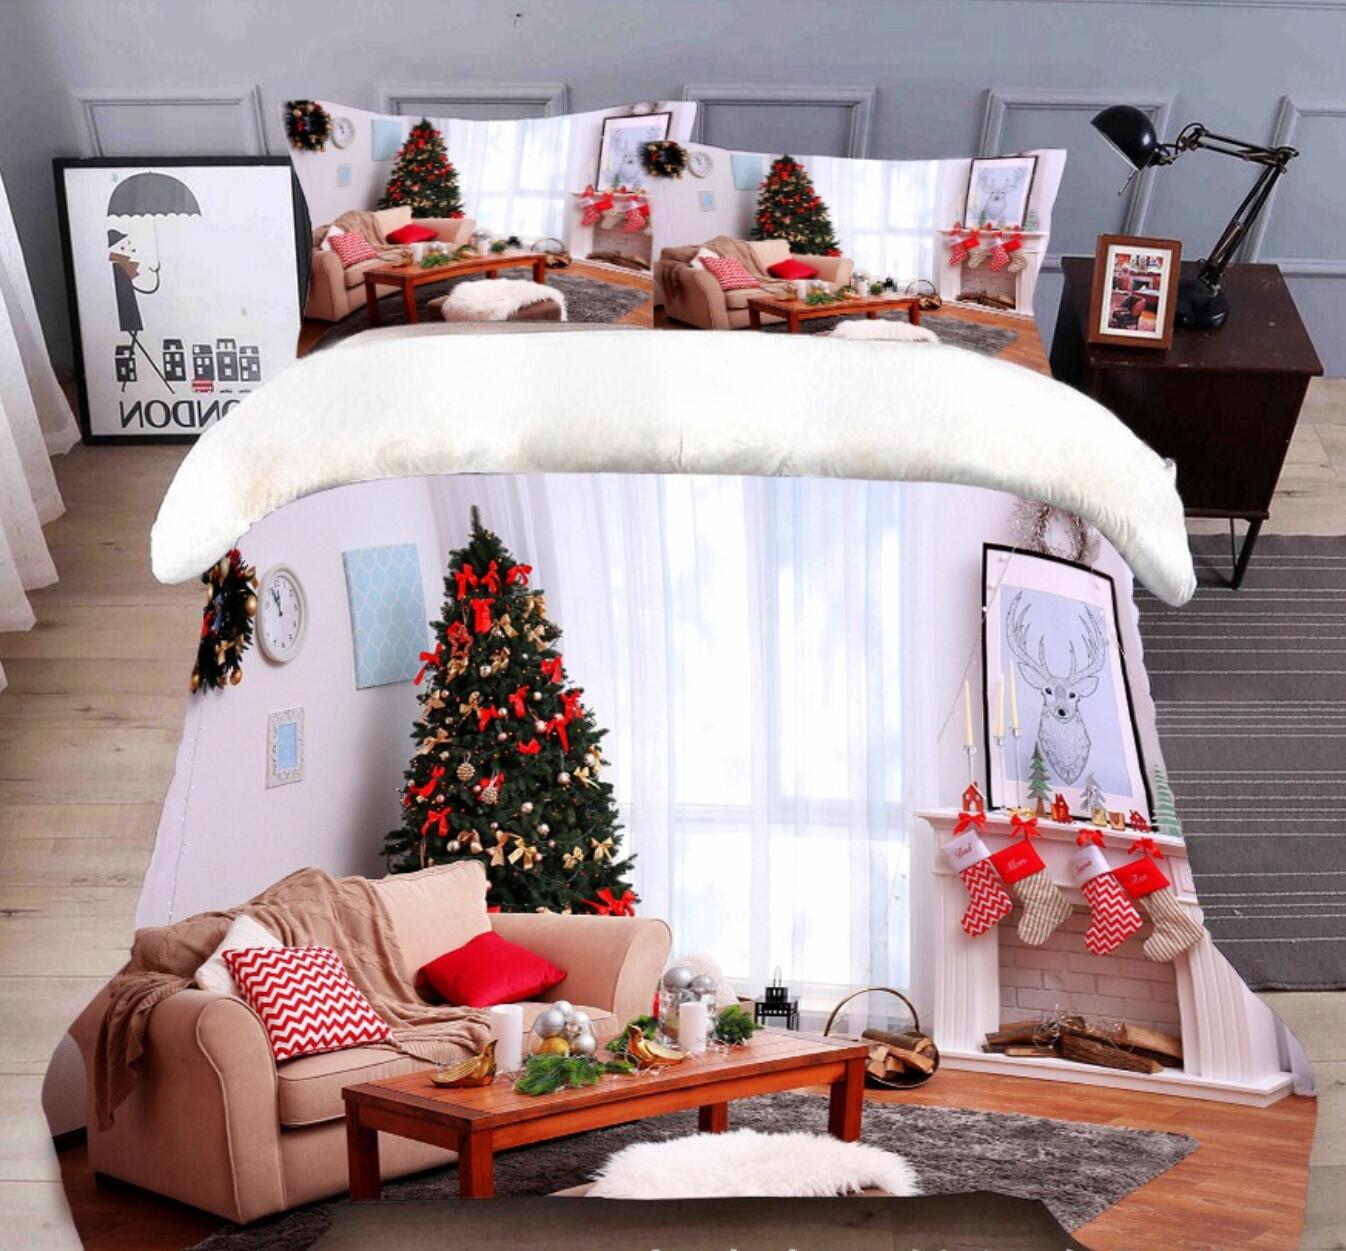 3D Sofa Table Tree 32014 Christmas Quilt Duvet Cover Xmas Bed Pillowcases